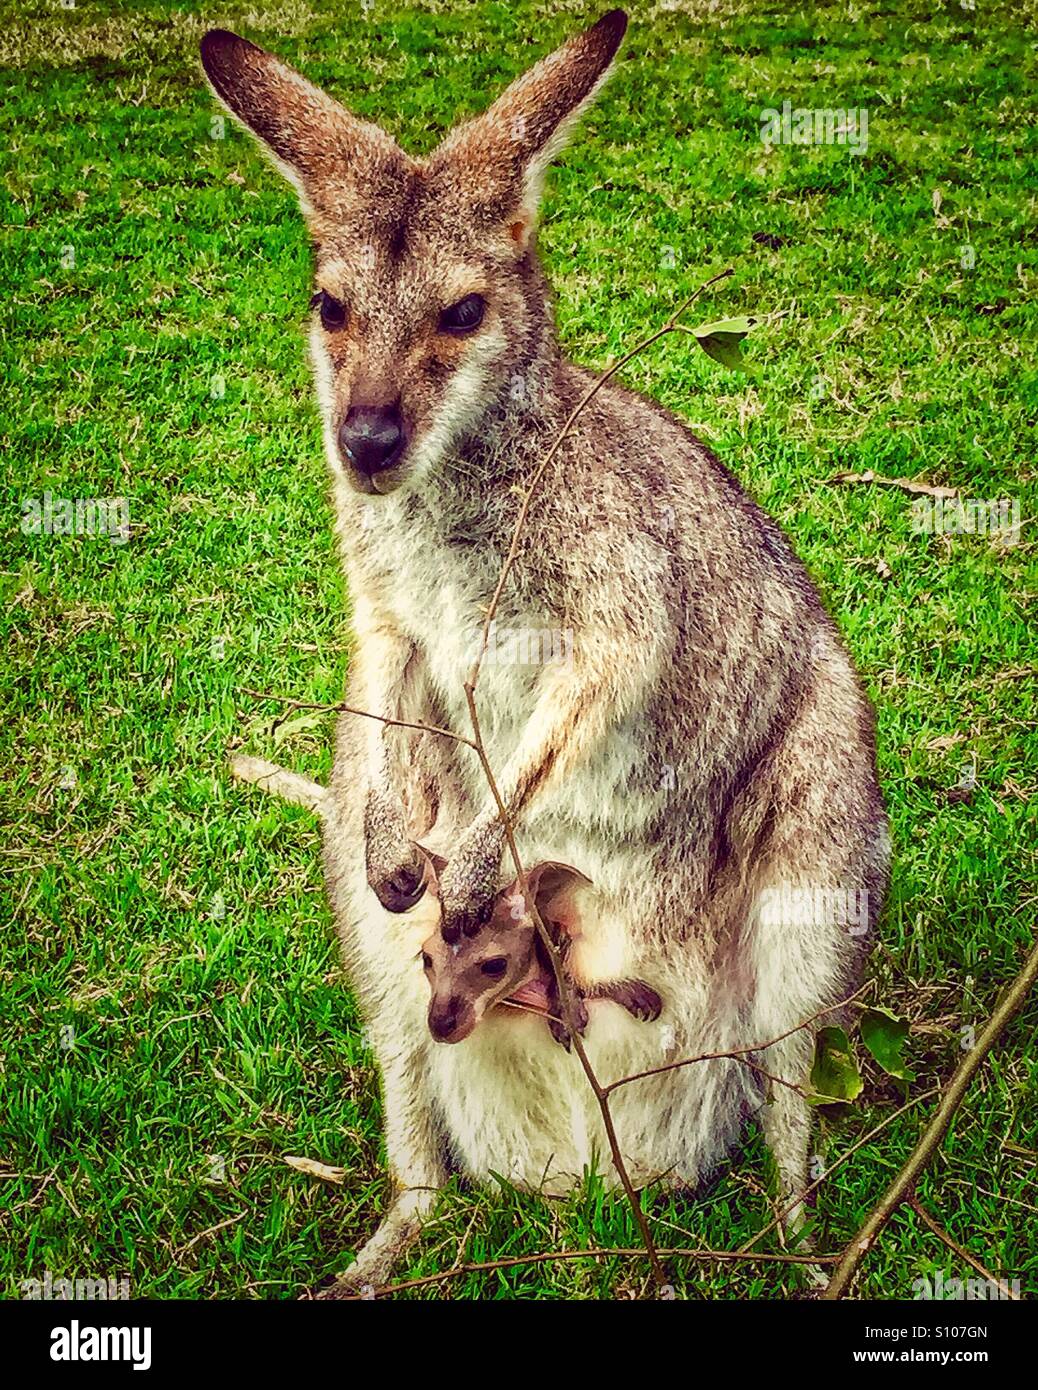   https://c8.alamy.com/comp/S107GN/mother-kangaroo-carrying-baby-kangaroo-in-the-pouch-S107GN.jpg   